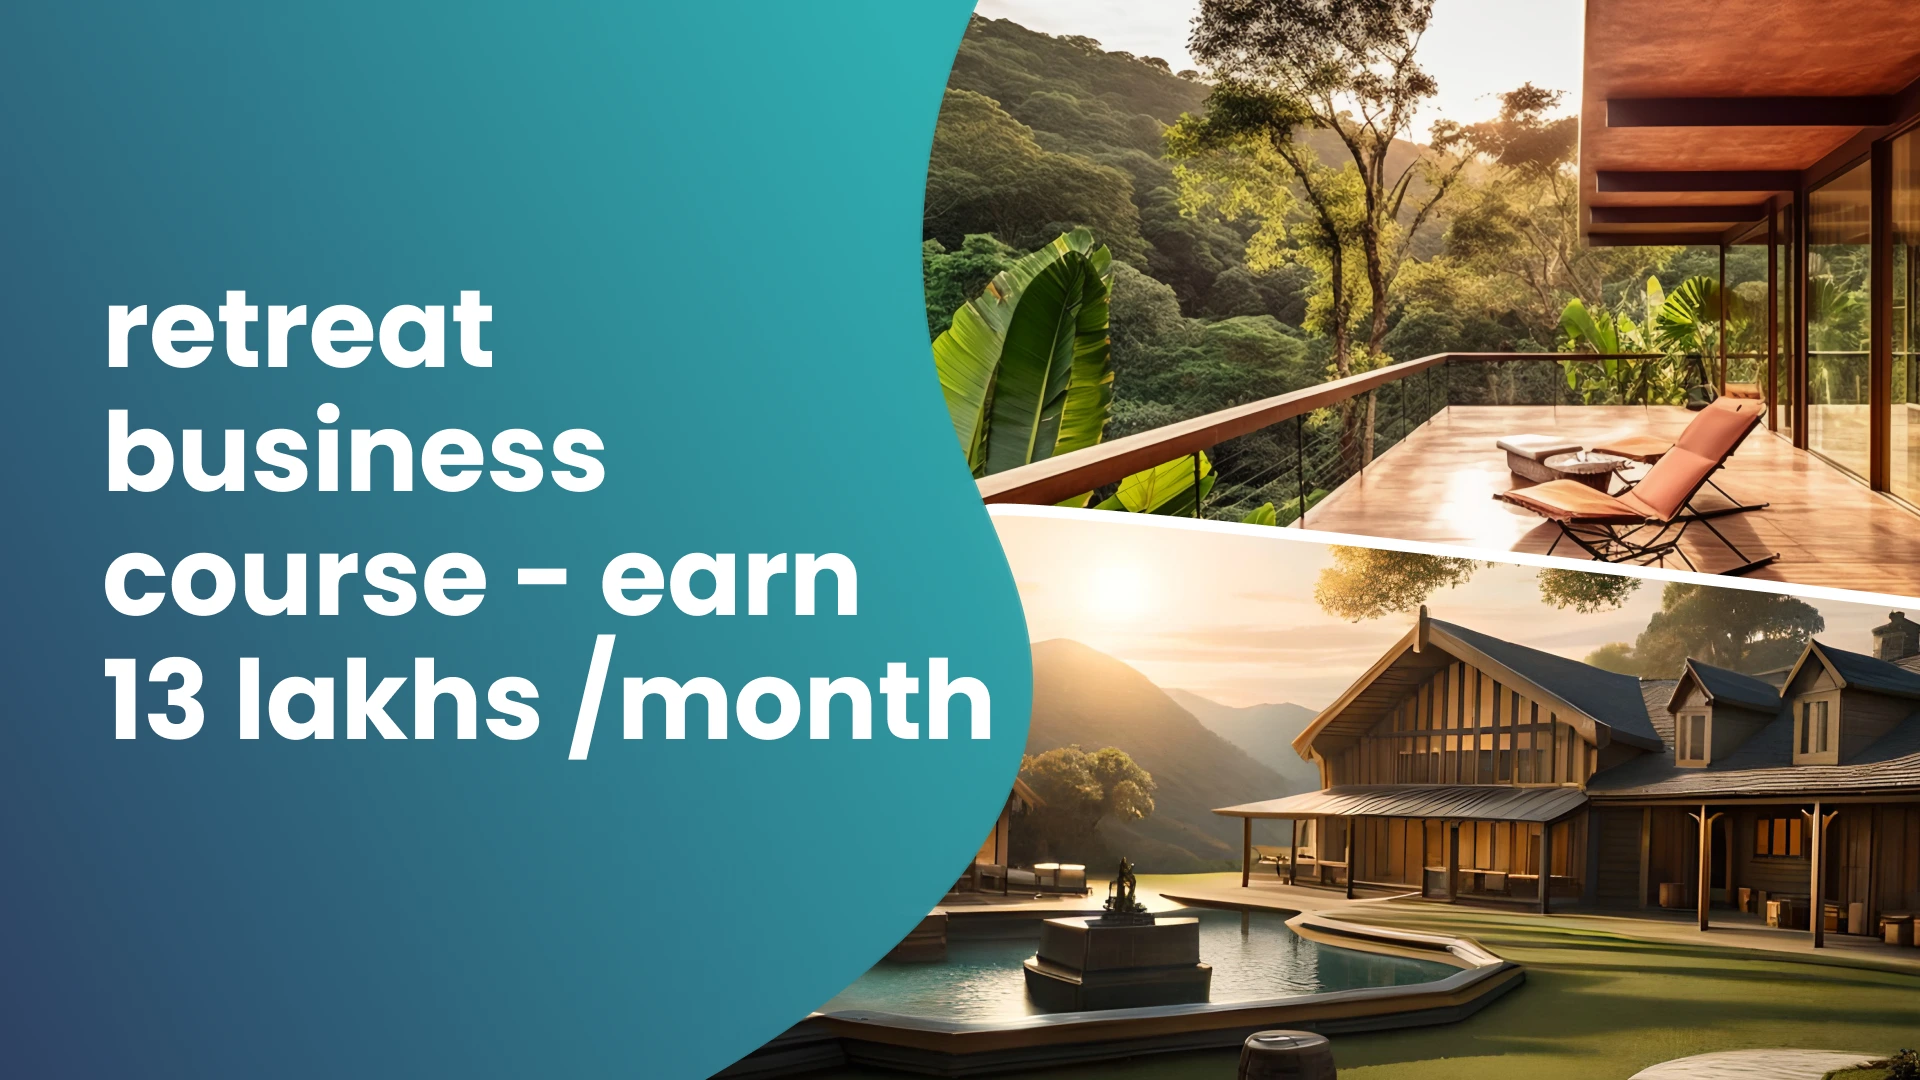 Course Trailer: Course on Retreat Business – Earn 13 Lakh Per Month. Watch to know more.